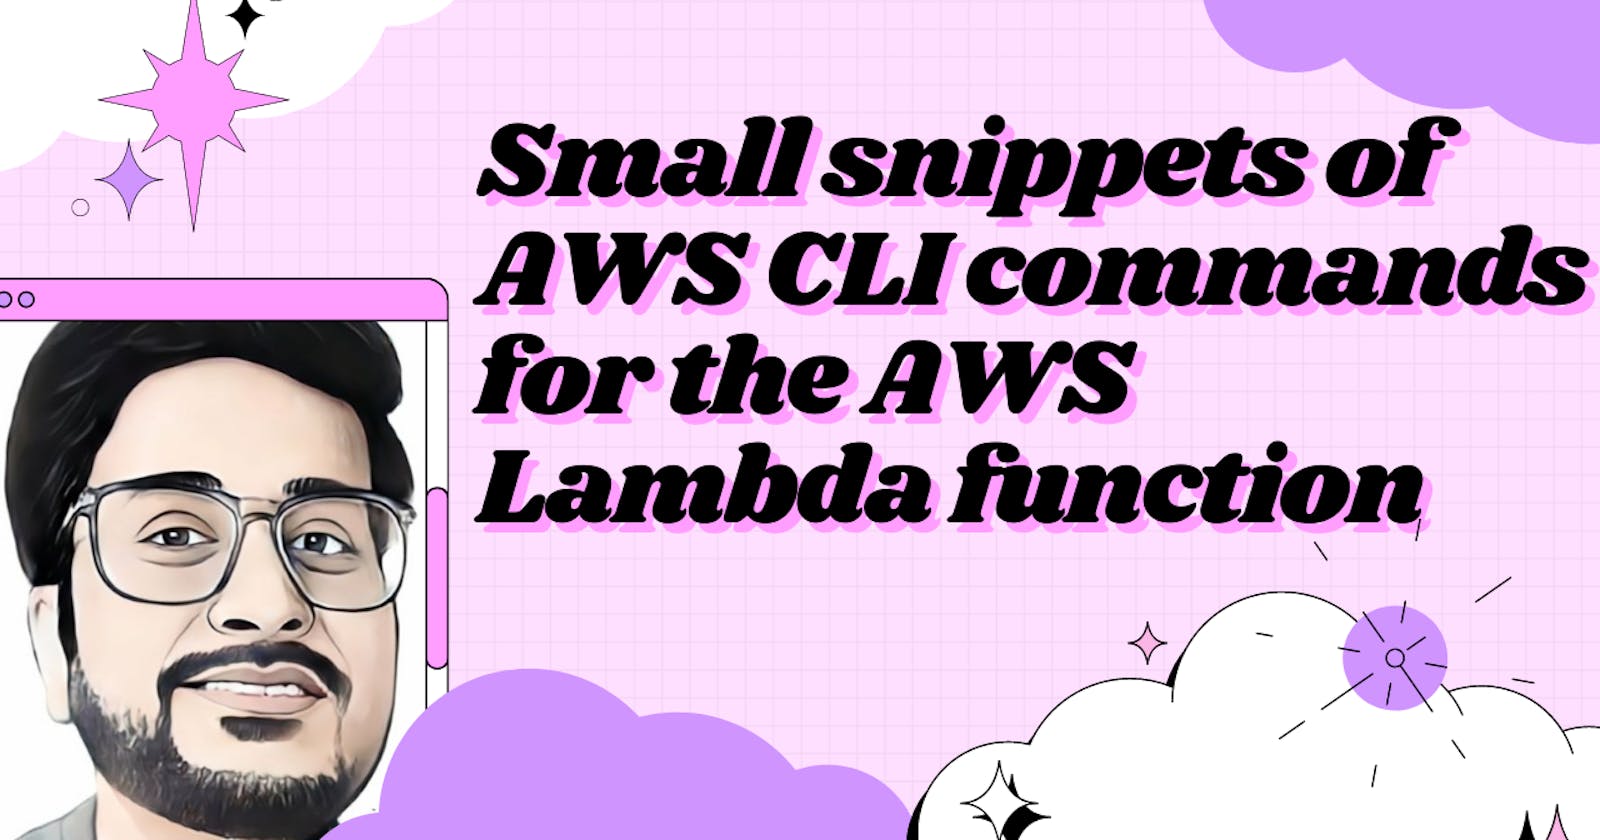 Small snippets of AWS CLI commands for the AWS Lambda function